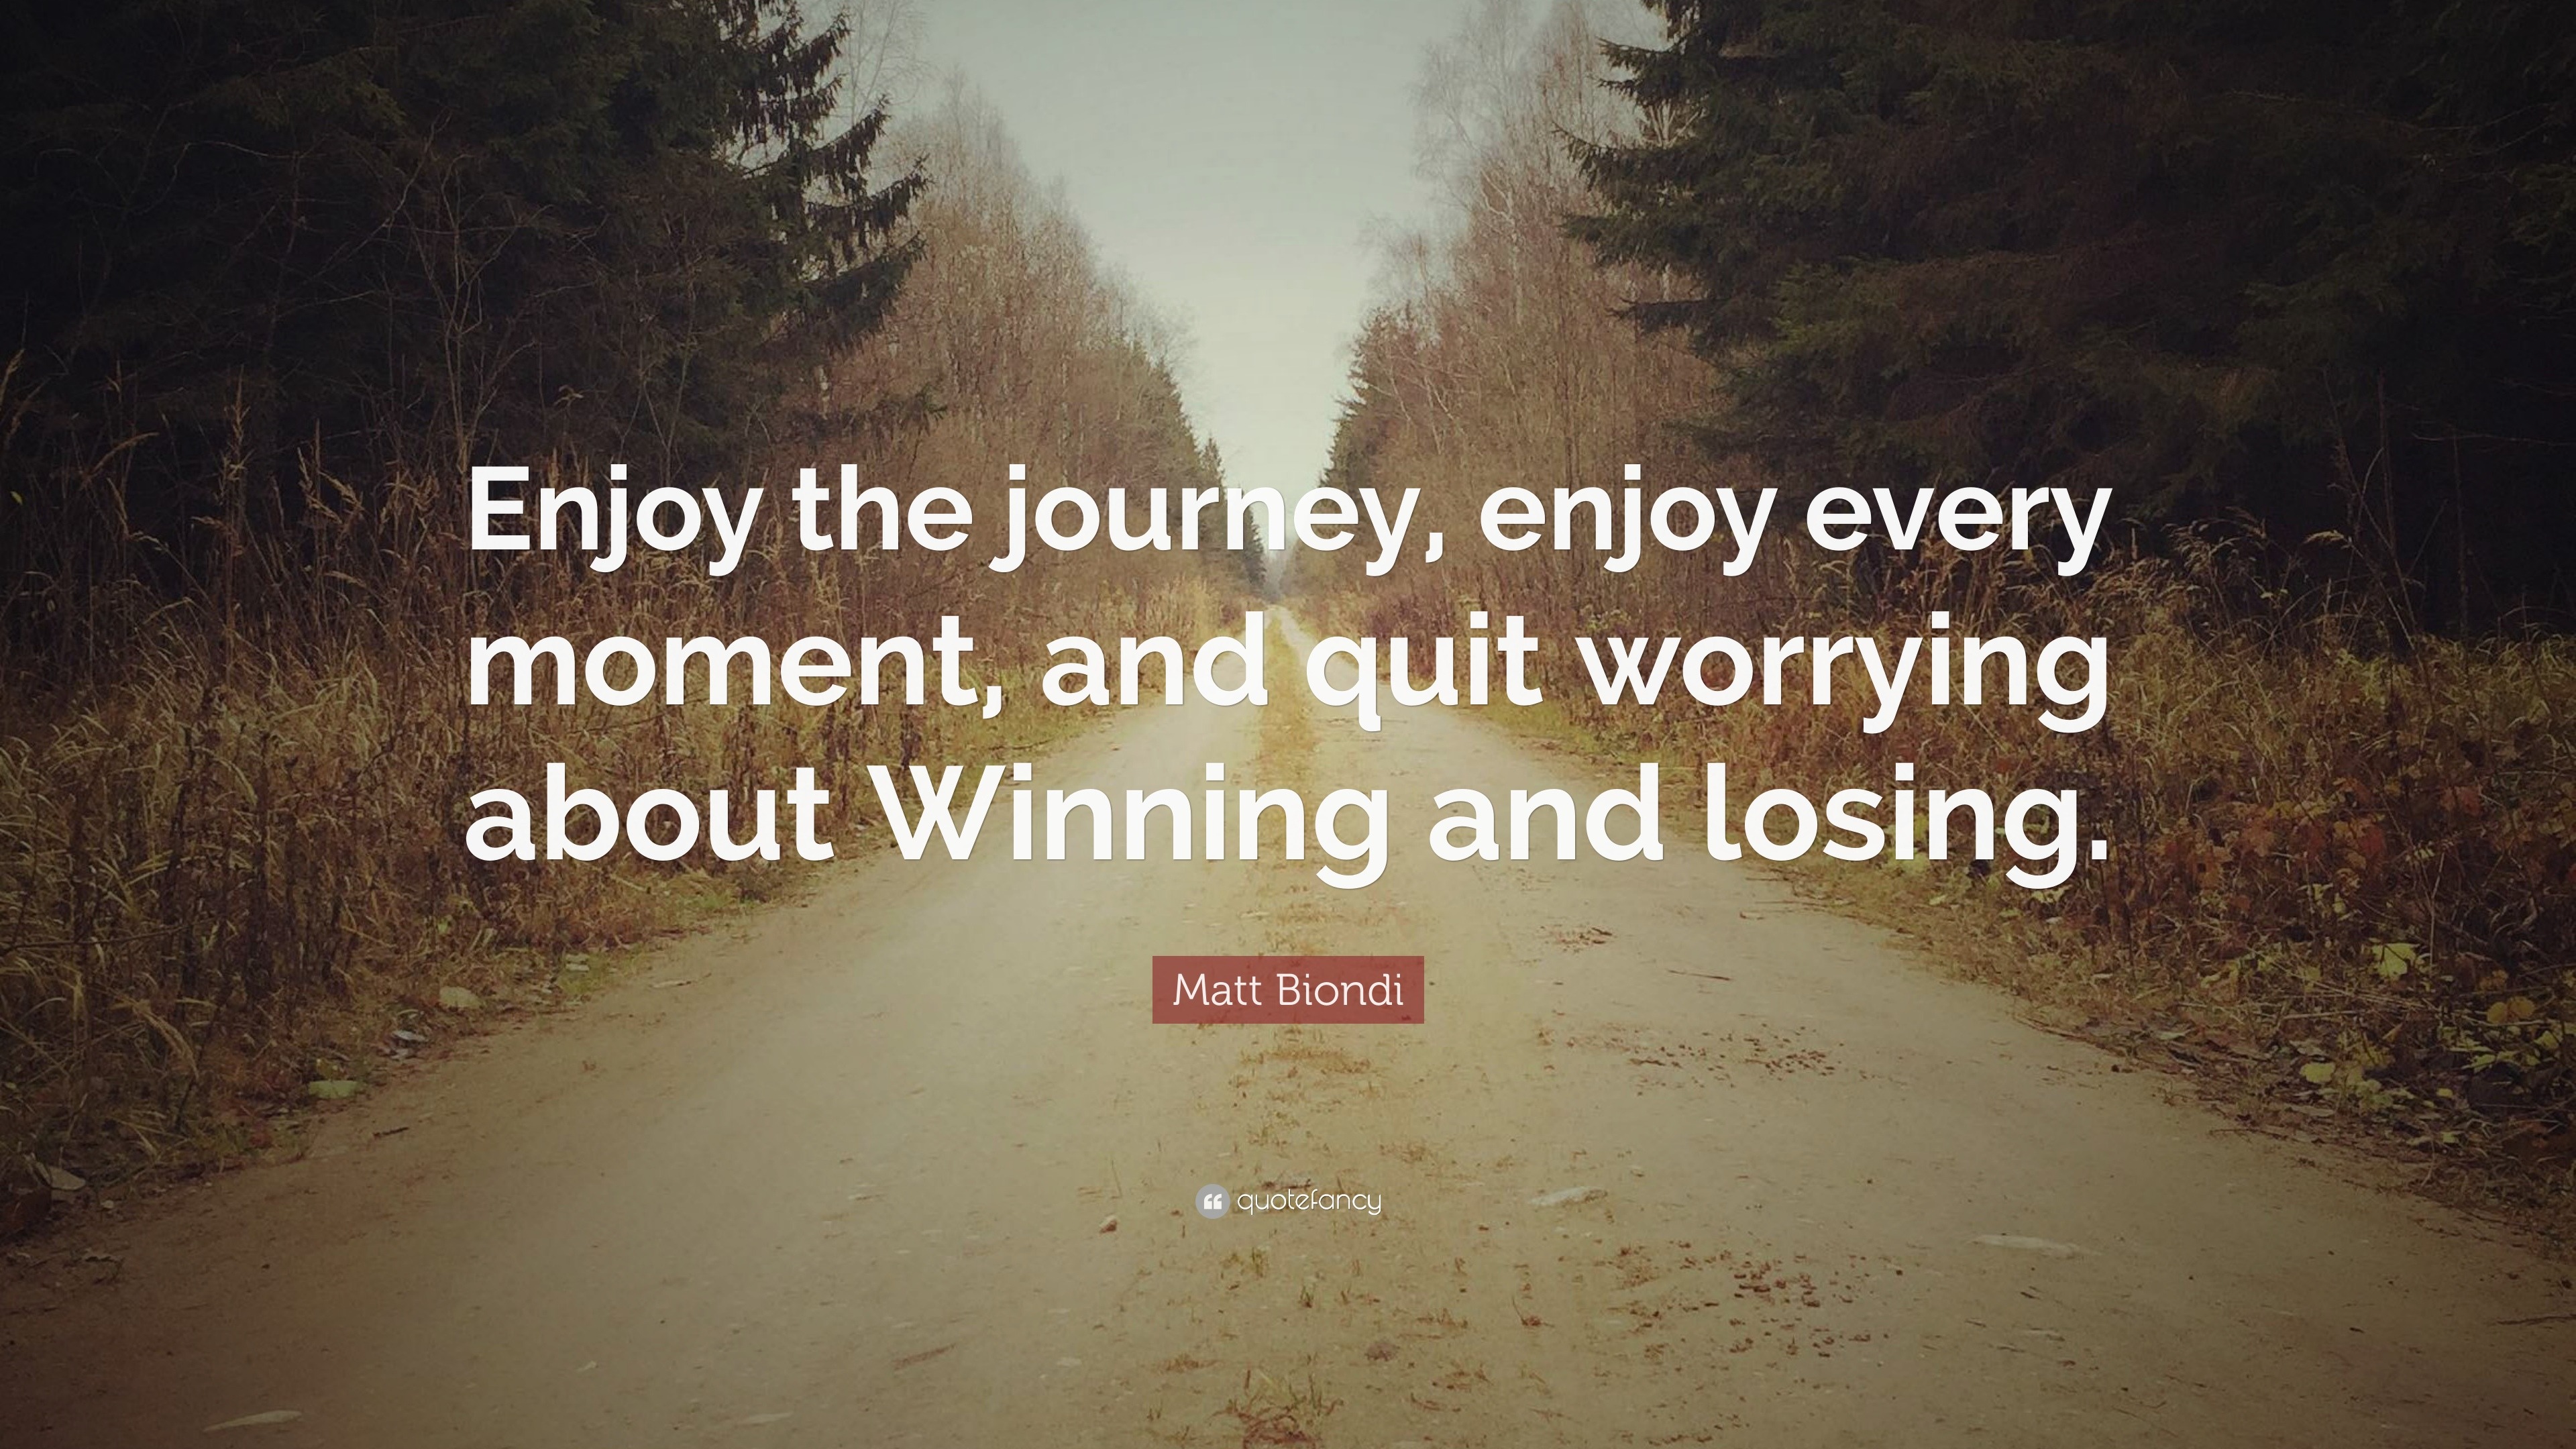 enjoy every moment of the journey